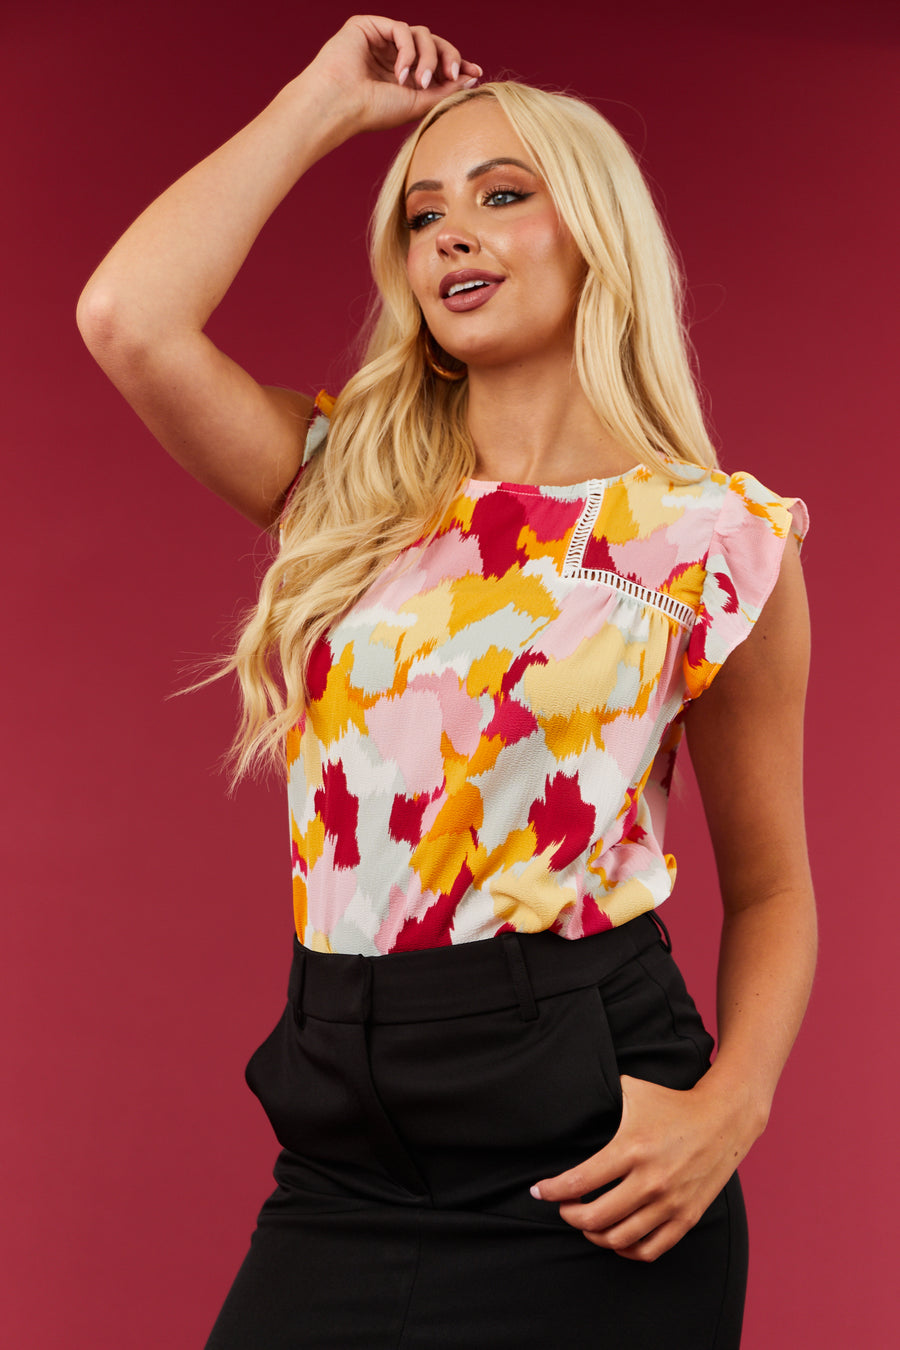 Multicolor Abstract Print Ruffle Sleeve Top